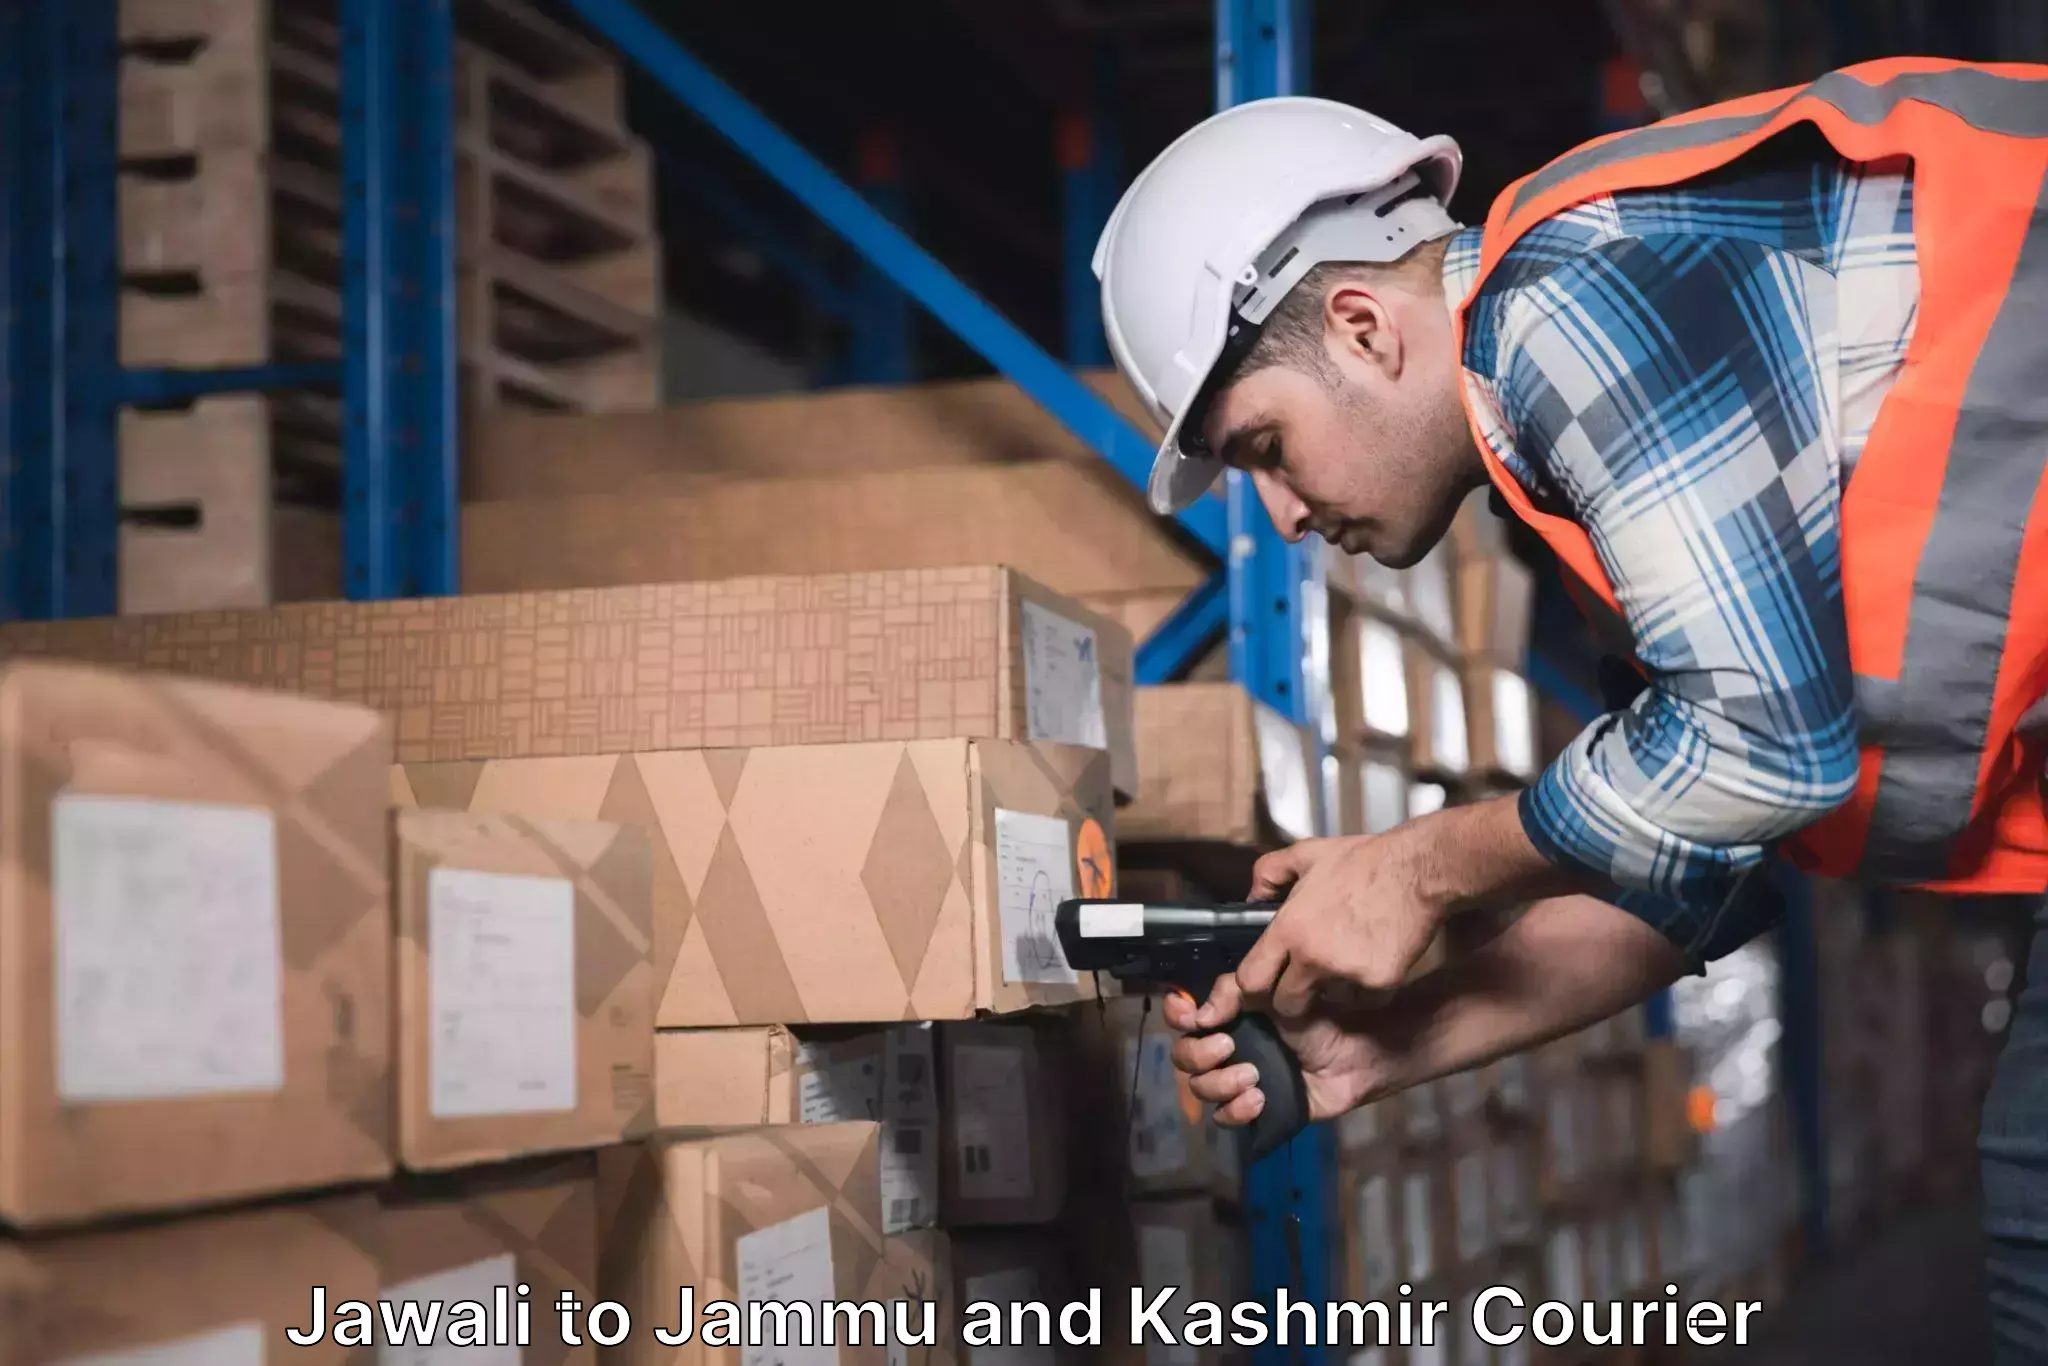 Rapid shipping services Jawali to Jammu and Kashmir